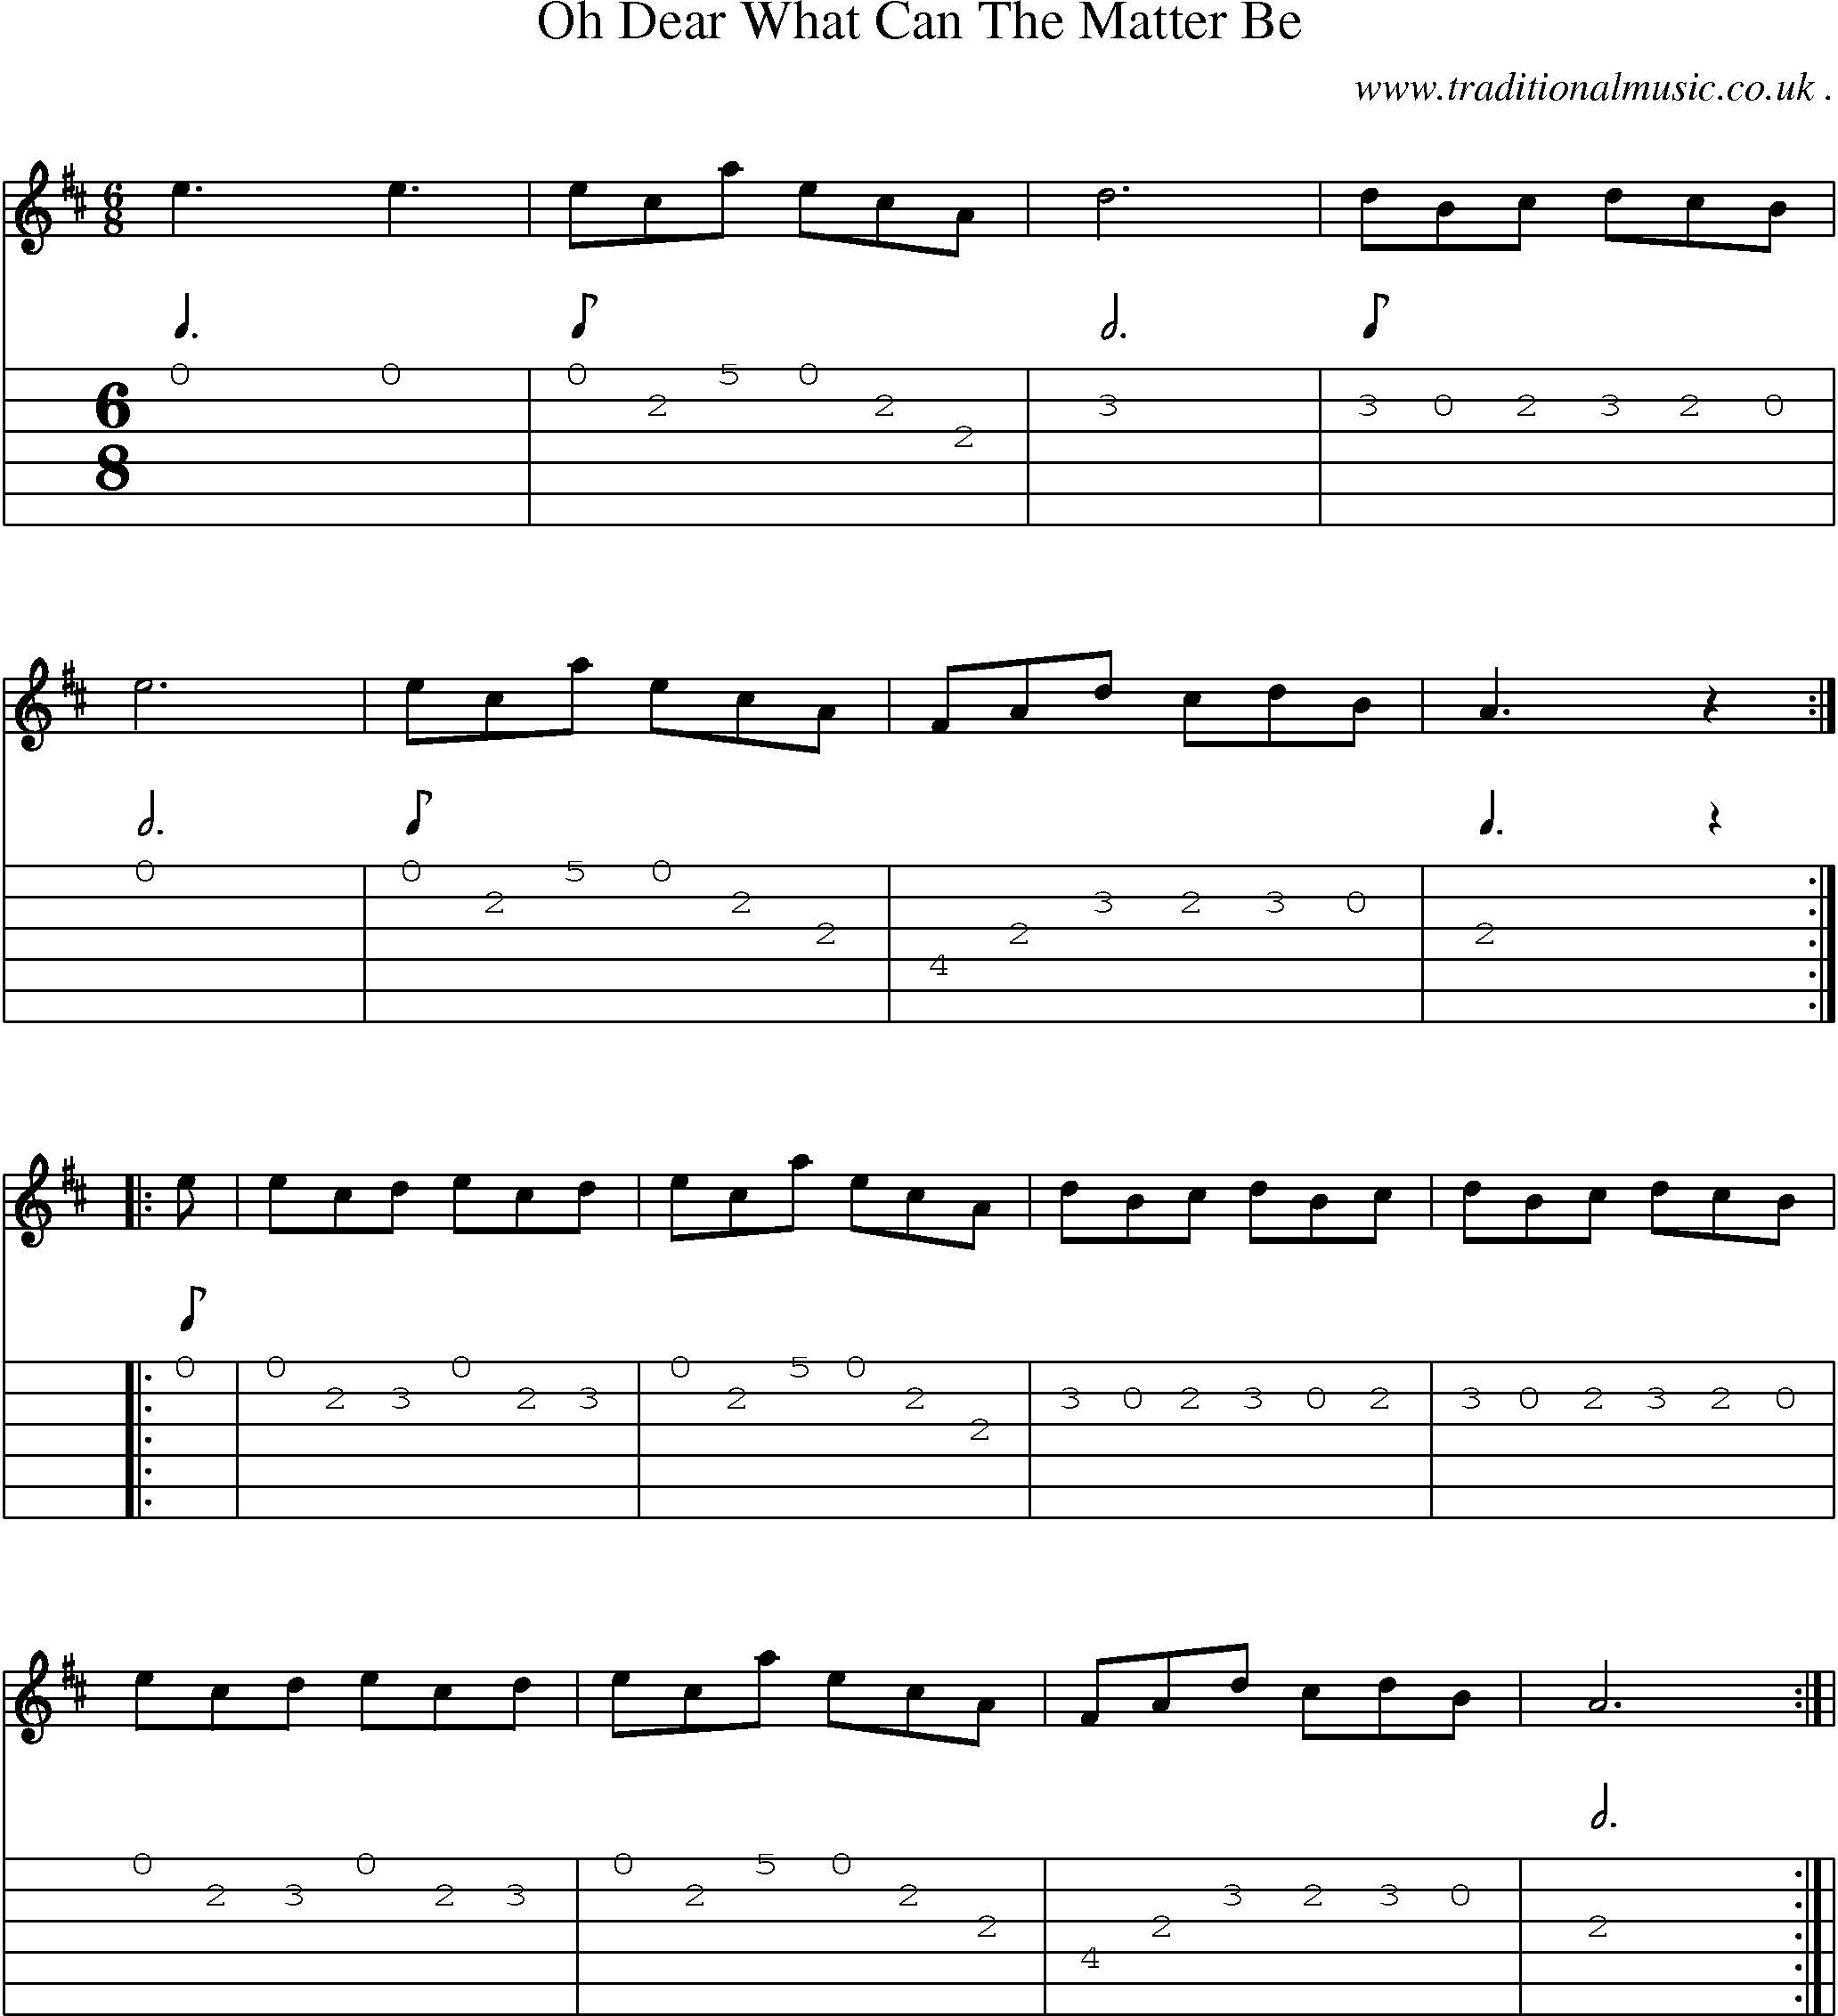 Sheet-Music and Guitar Tabs for Oh Dear What Can The Matter Be